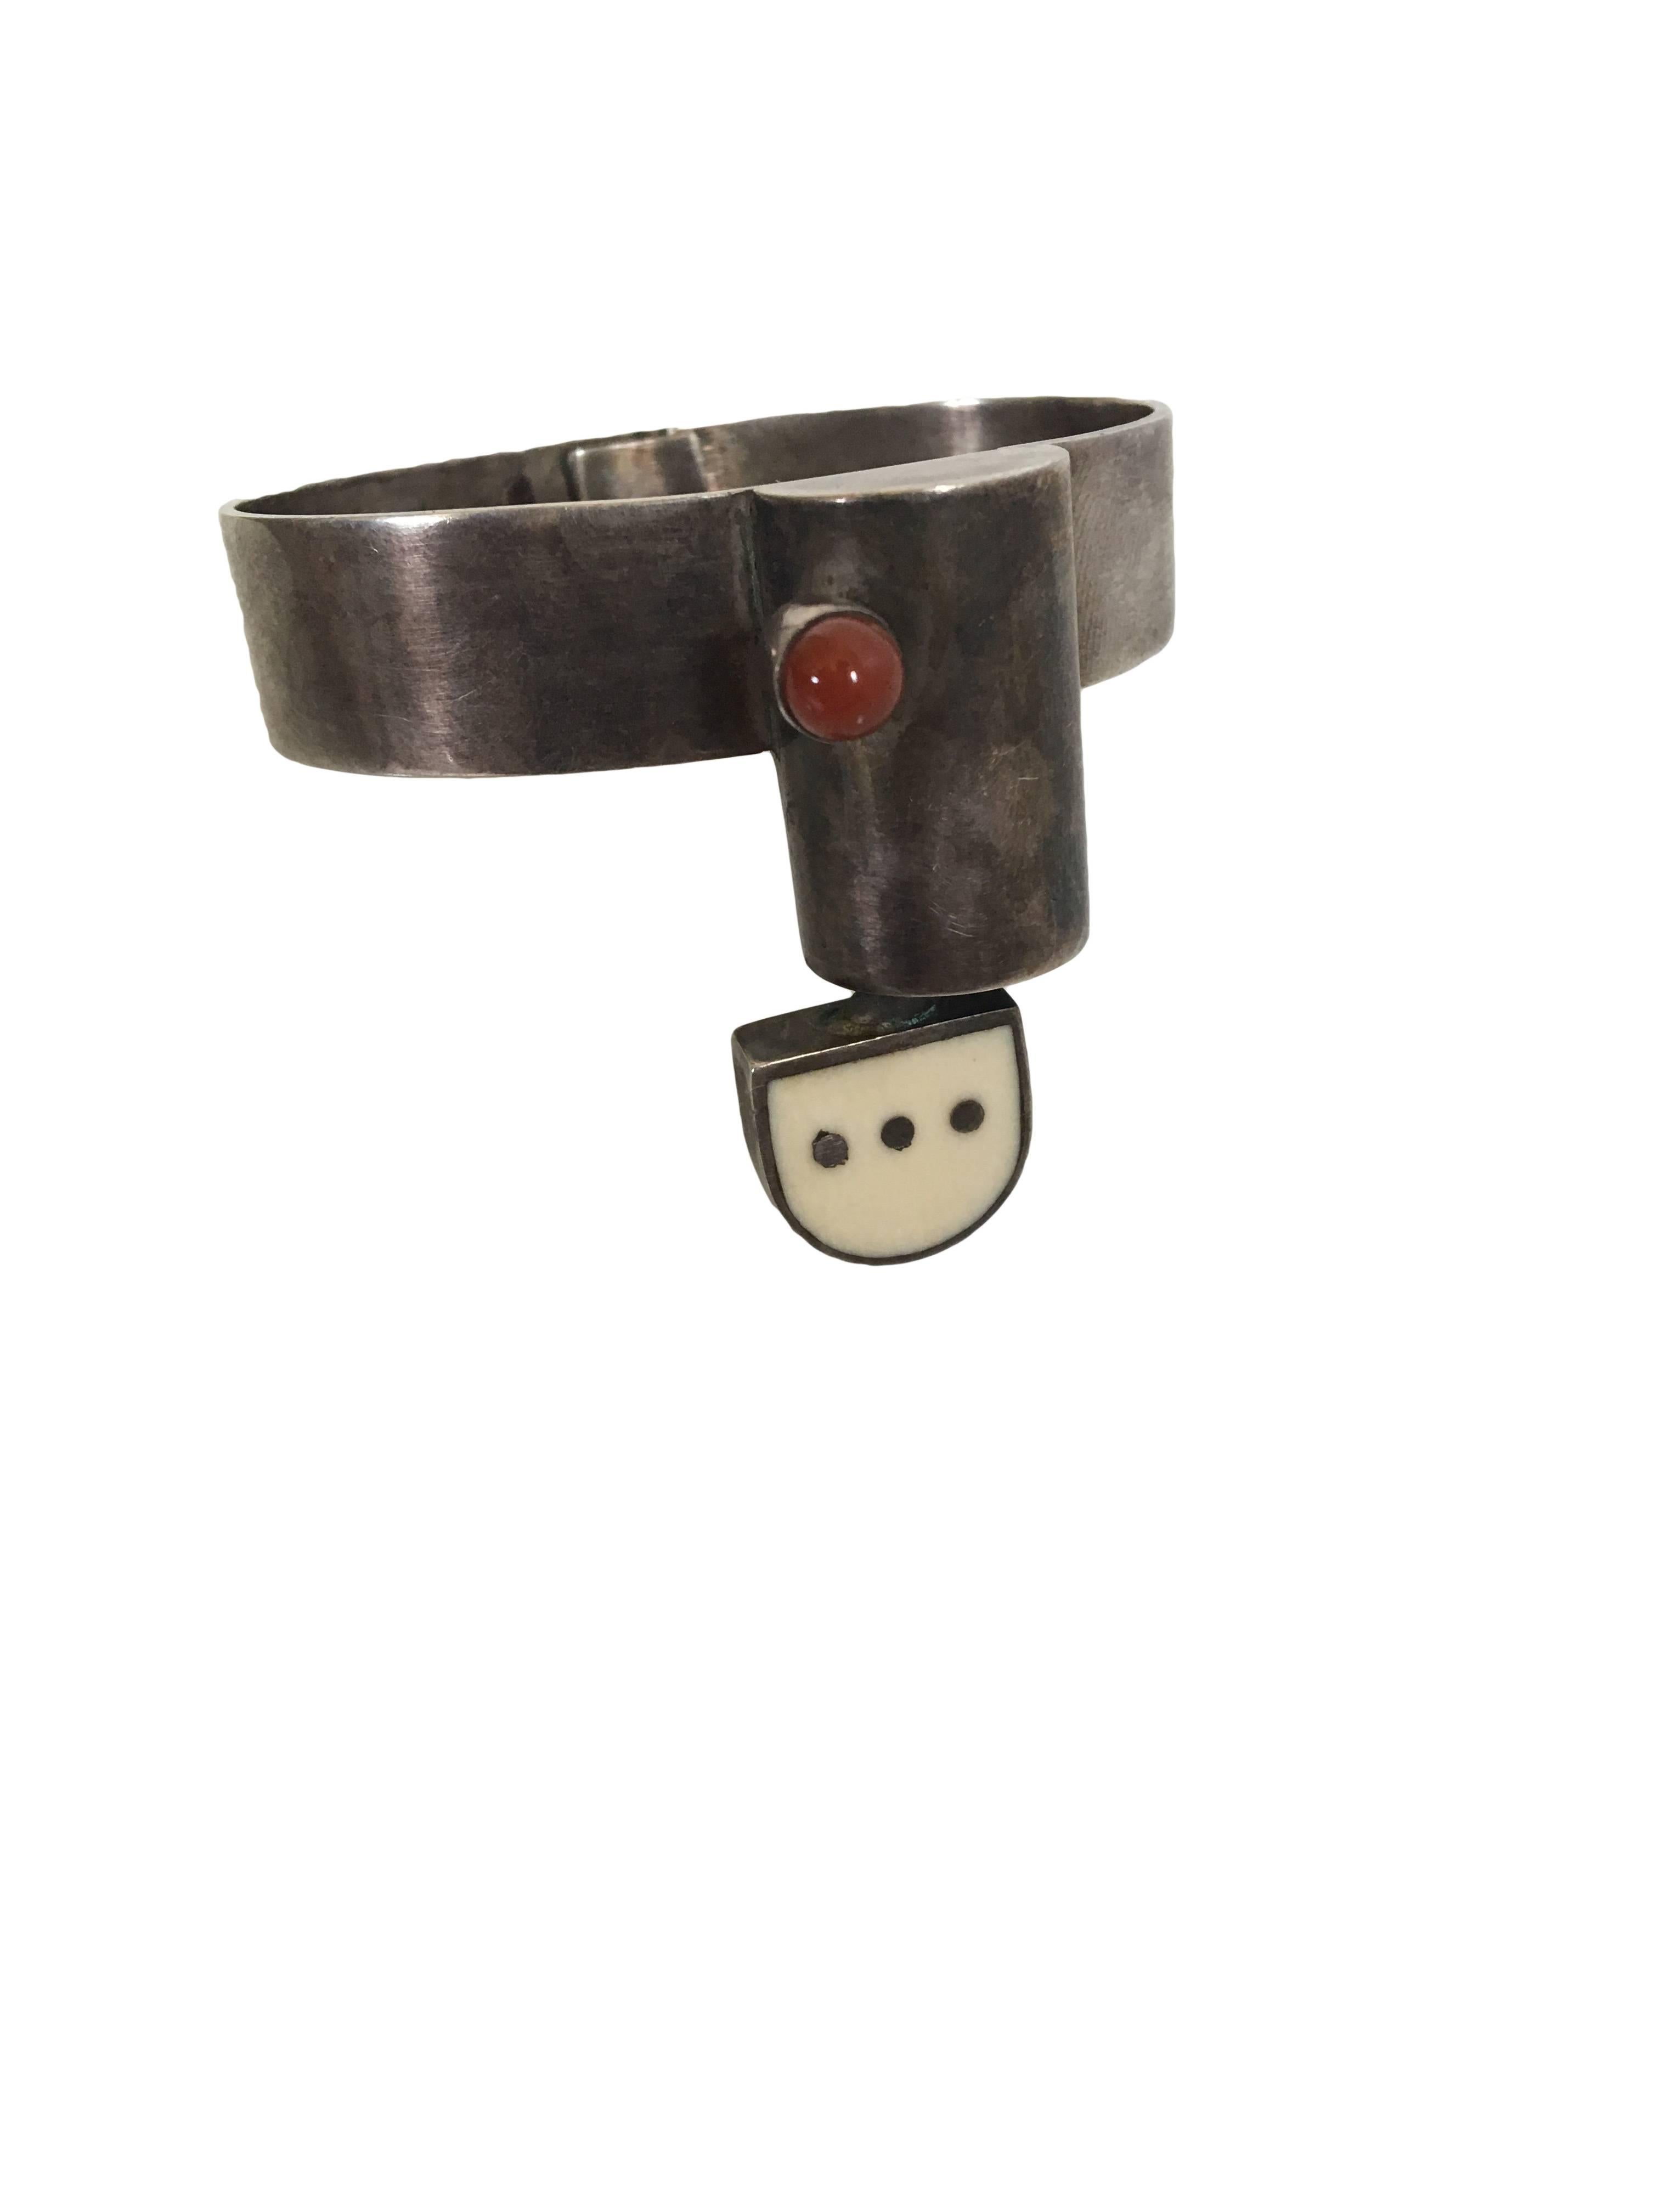 Sterling silver and enamel bracelet. Signed. From the estate of Elizabeth Rockwell, the woman behind the Outlines gallery, one of the most important modernist art galleries in the country started in 1941.